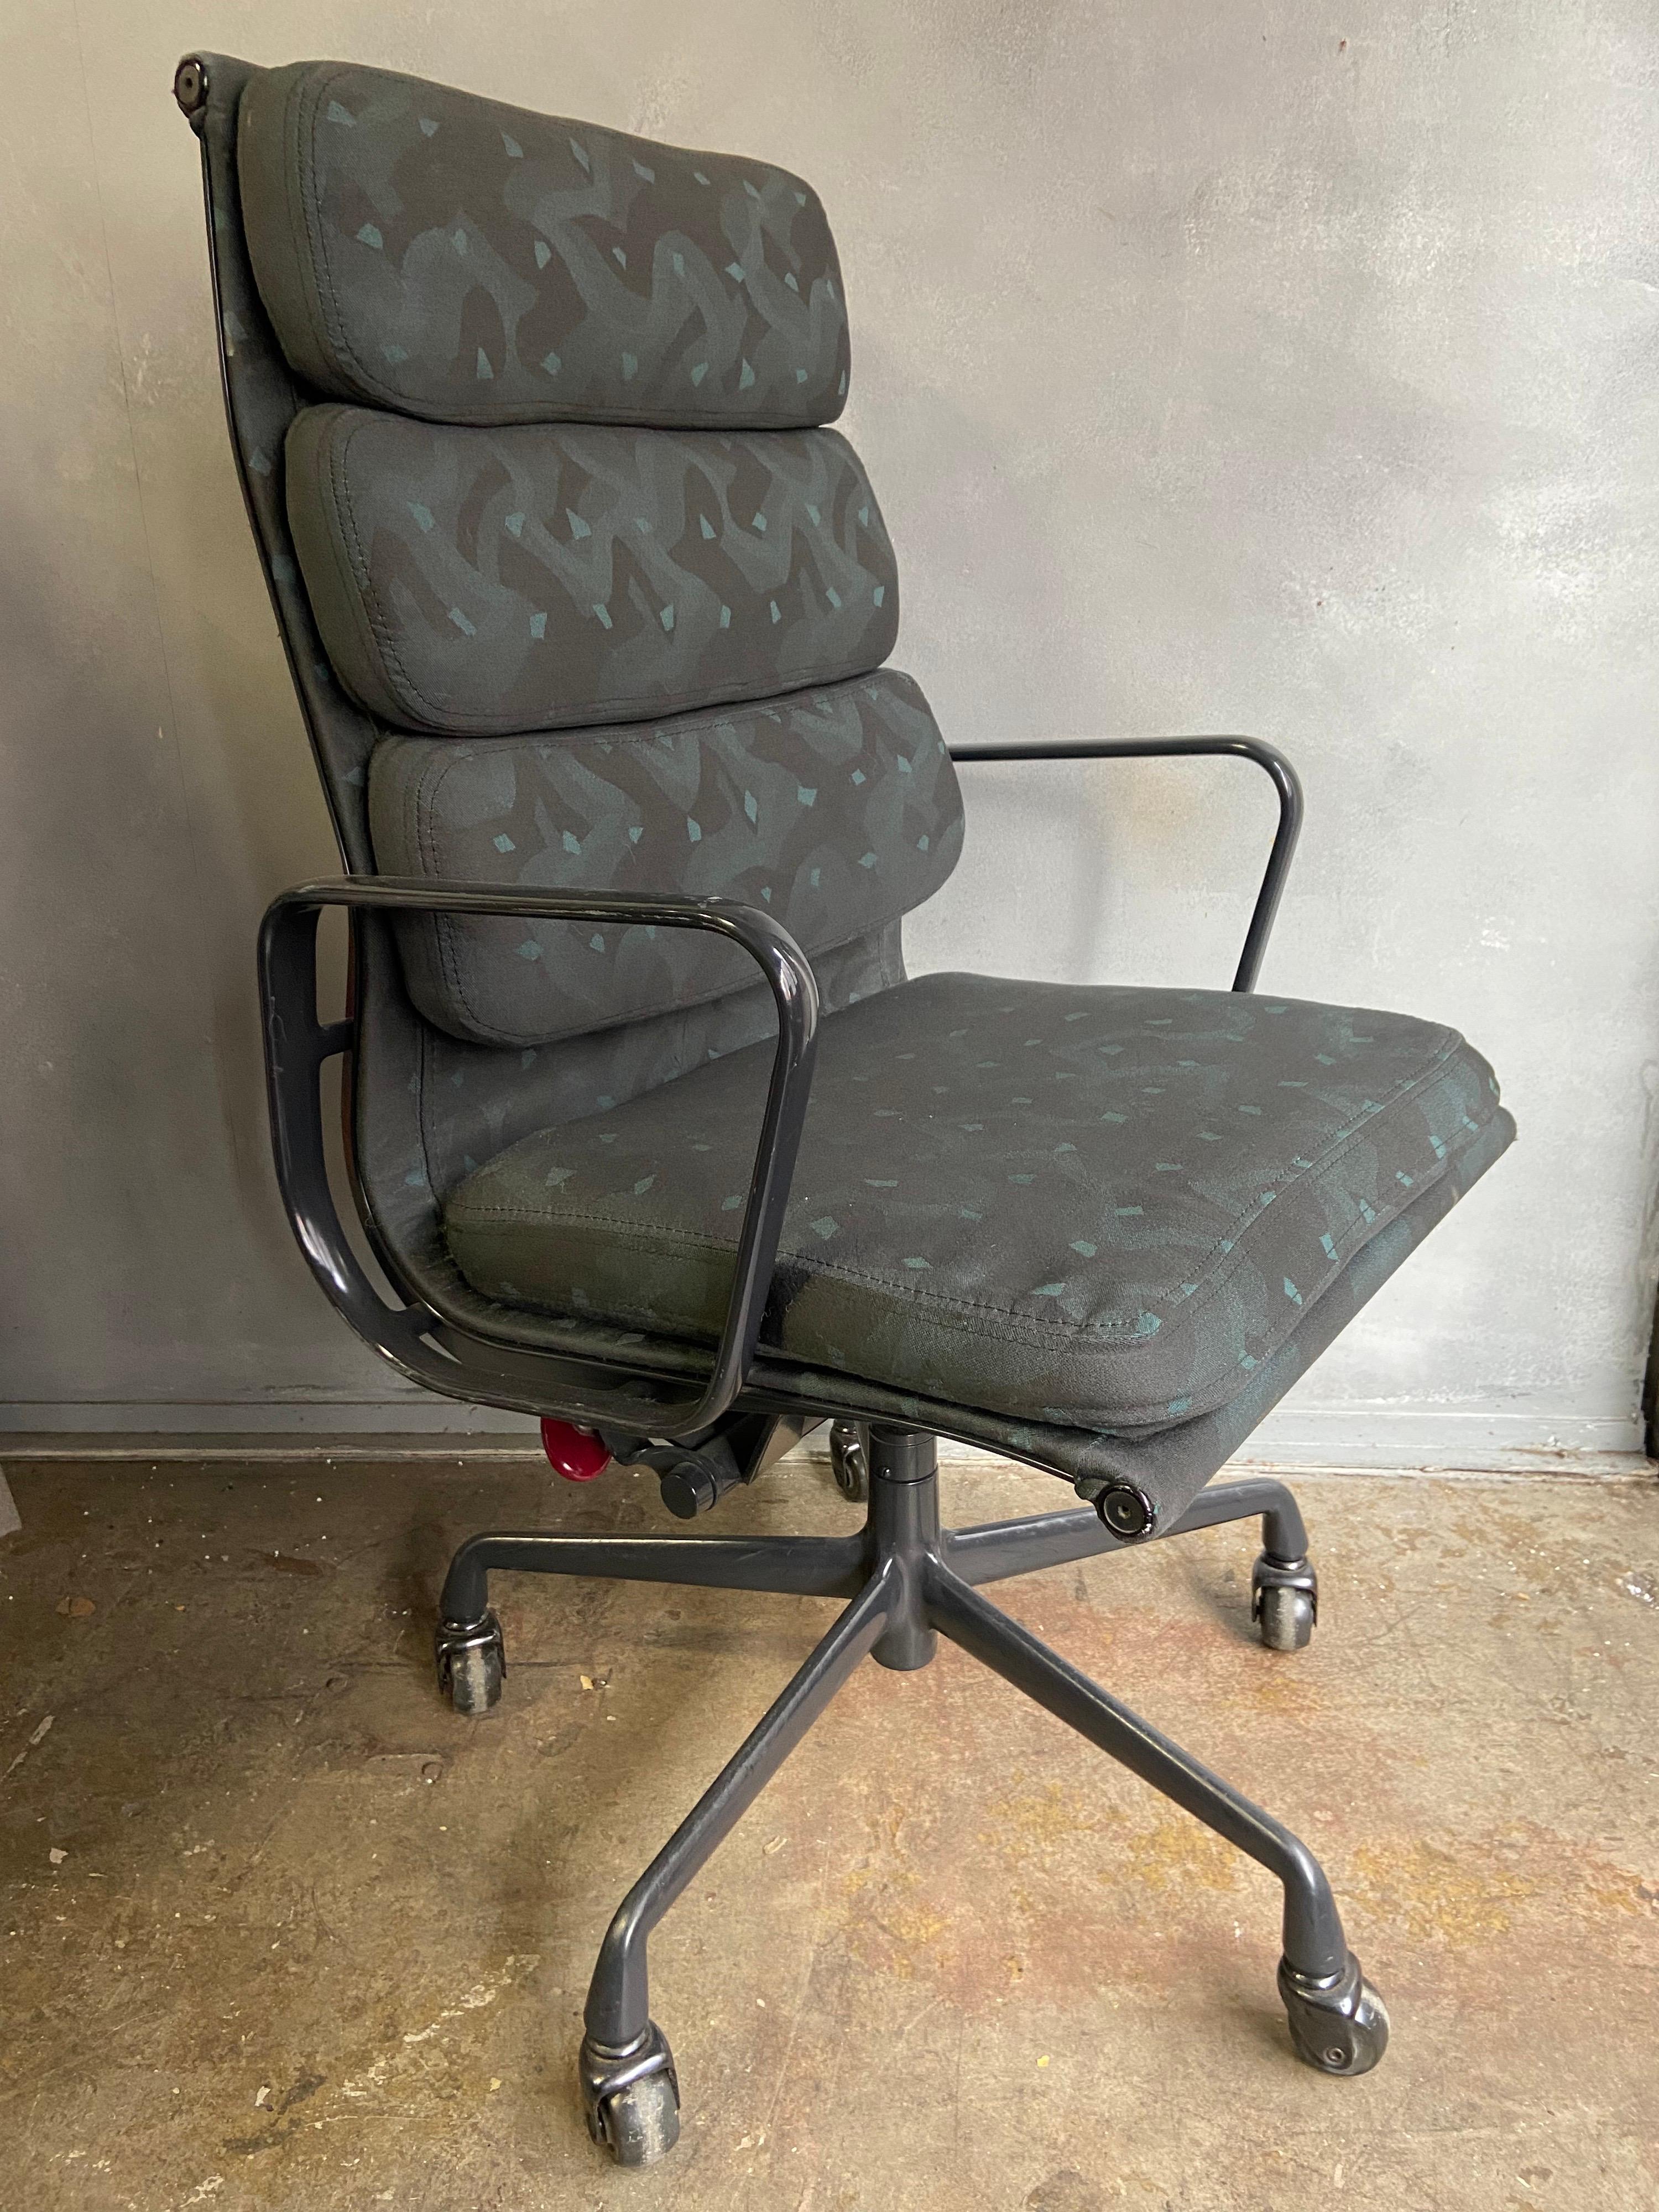 Are rare find of 1980's Soft Pad chairs with high backs from the 1980's. These chairs have a strong Memphis Milano look with period fabric and red adjustment knob that can only be found on Eames chairs for a short time. The frames are in an almost